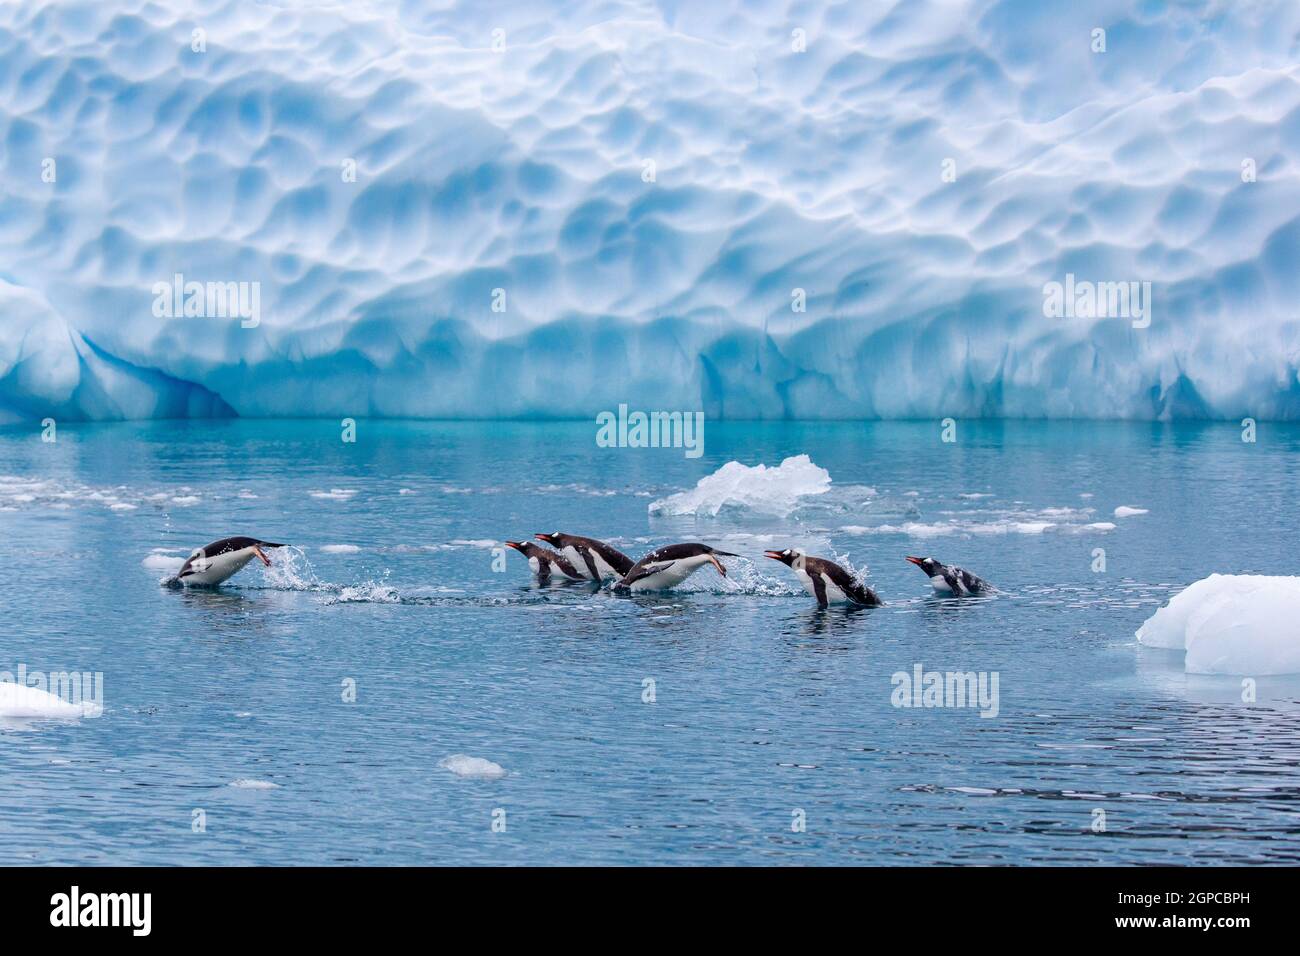 Gentoo penguins (Pygoscelis papua) Swim and diving in the water. Stock Photo